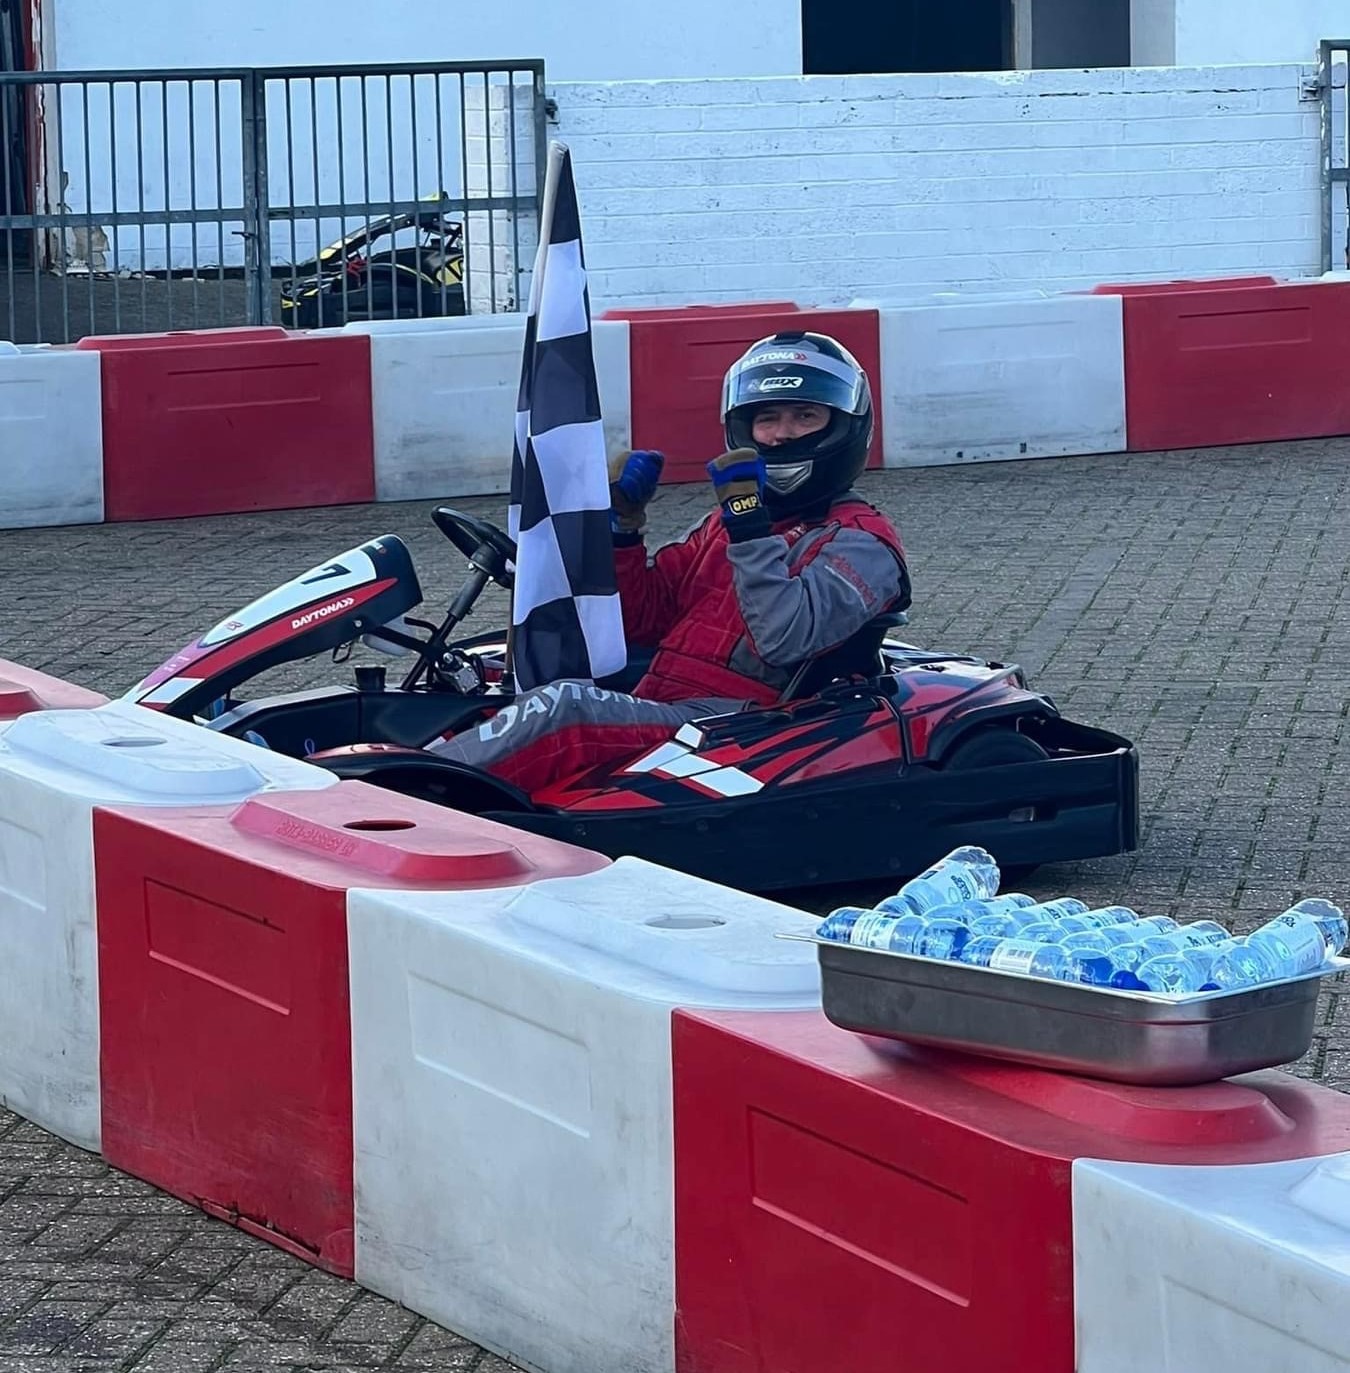 Bellway NHC - Victory at Charity Carting Event